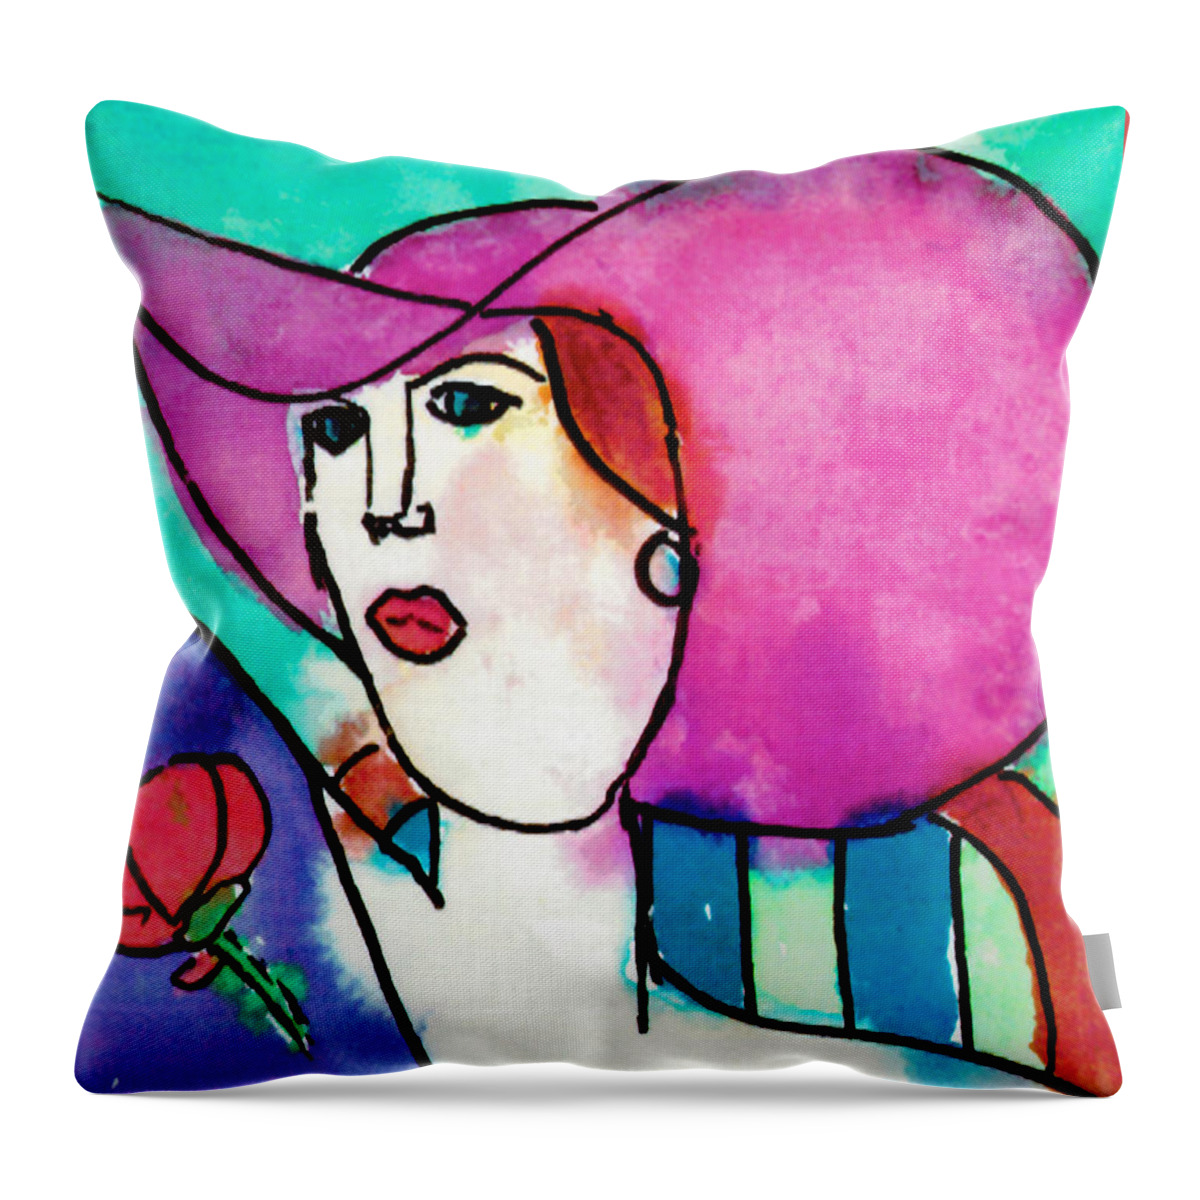 Fashion Throw Pillow featuring the painting Design Lady by Jessie Abrams Age Eleven